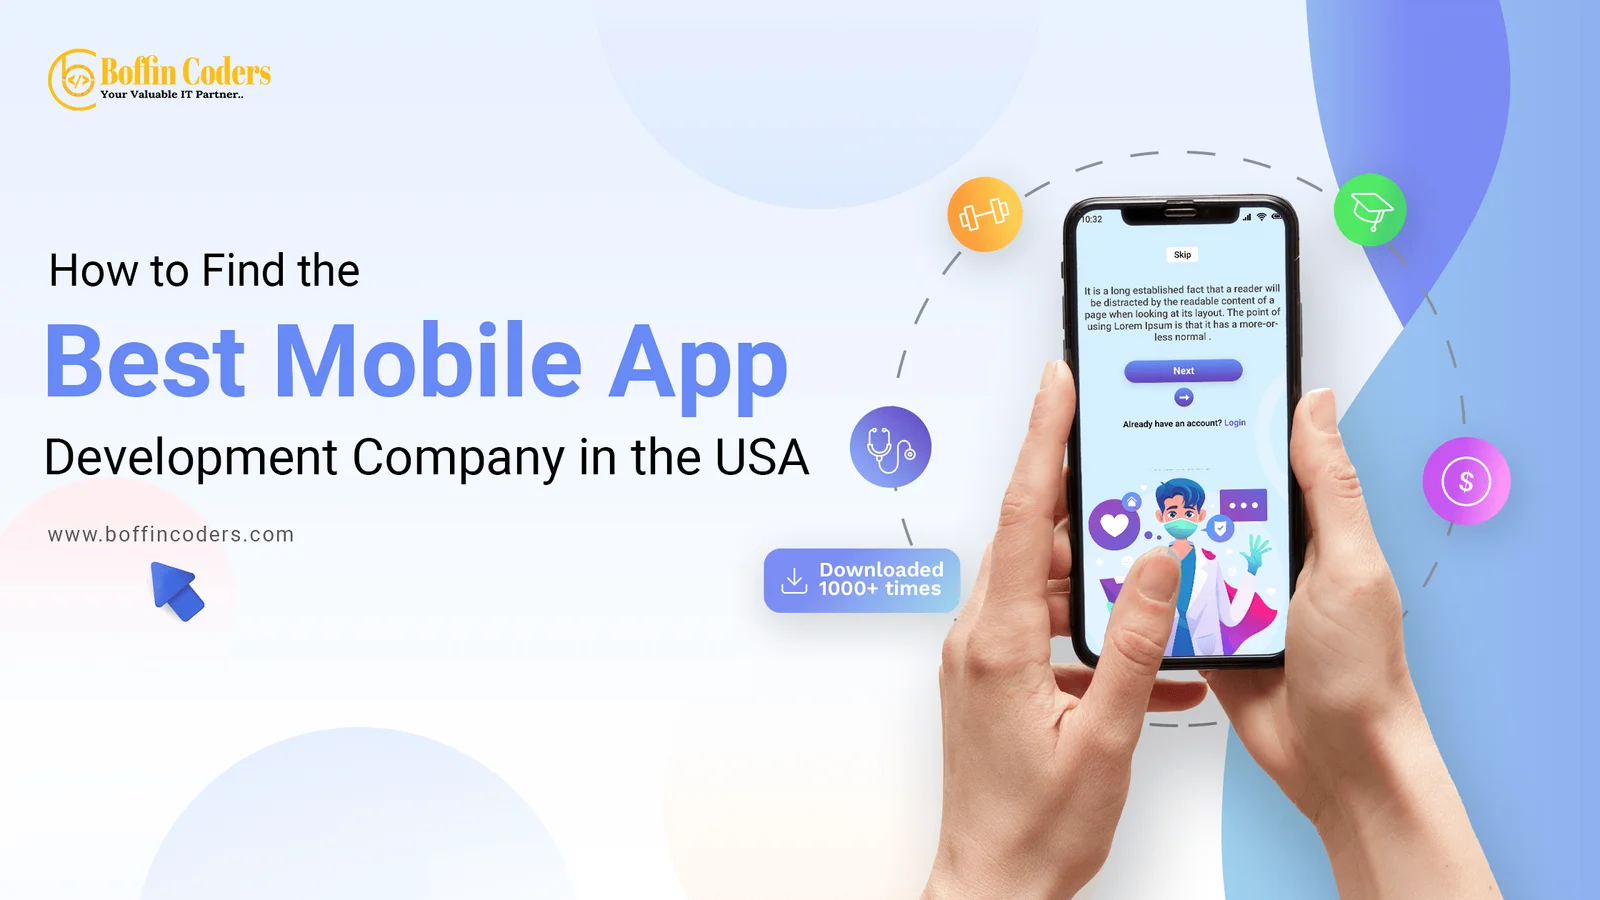 How to Find the Best Mobile App Development Company in the USA